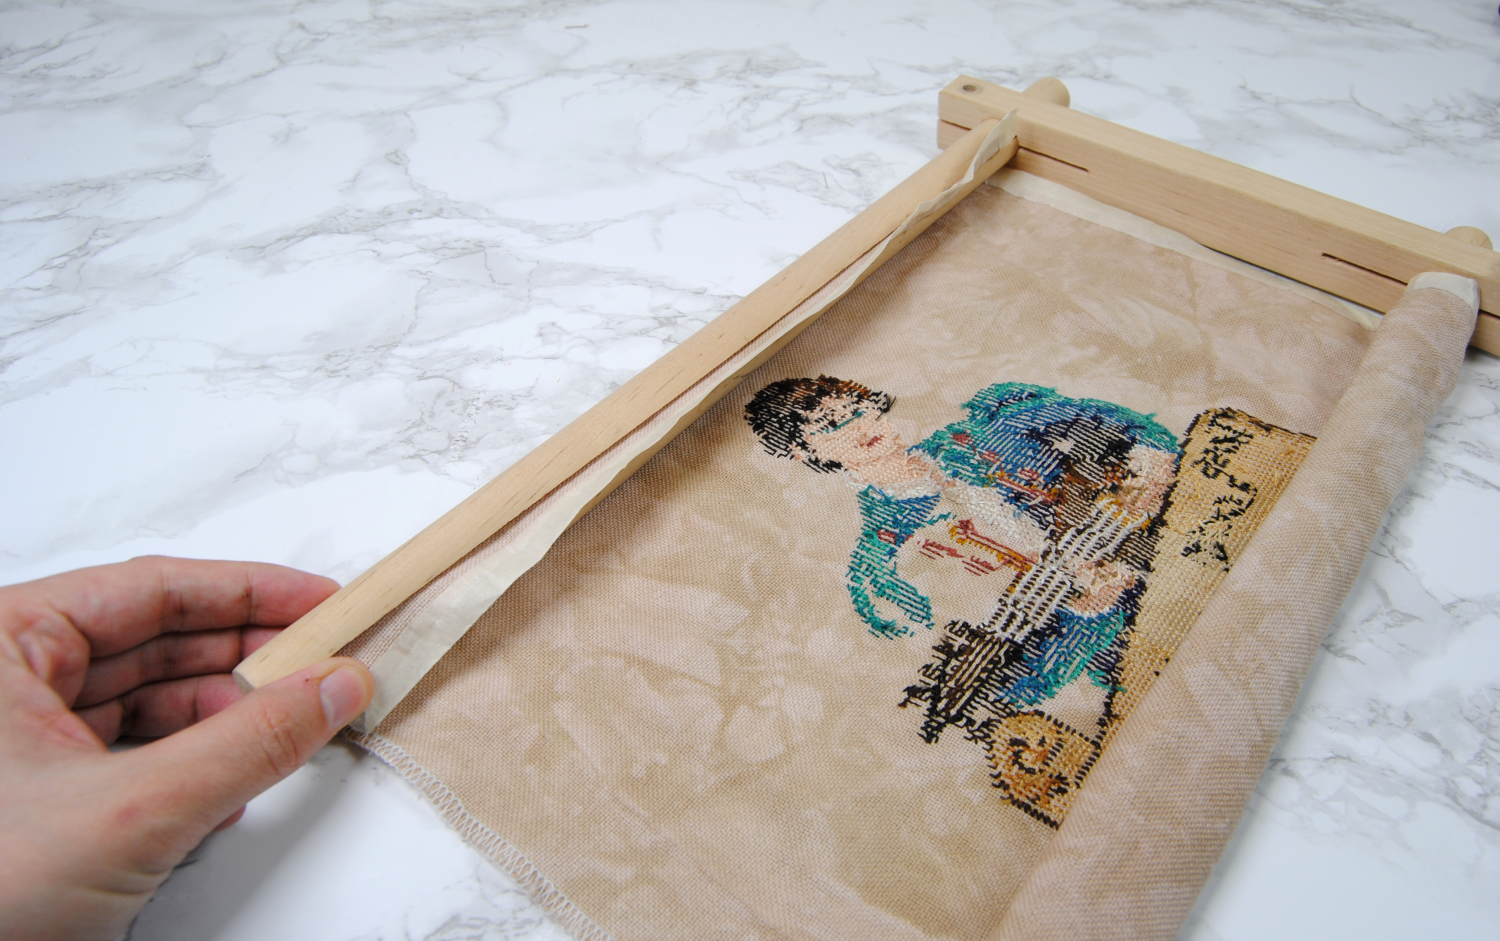 Wood Embroidery Clip Frame, Embroidery Tools Scrolls